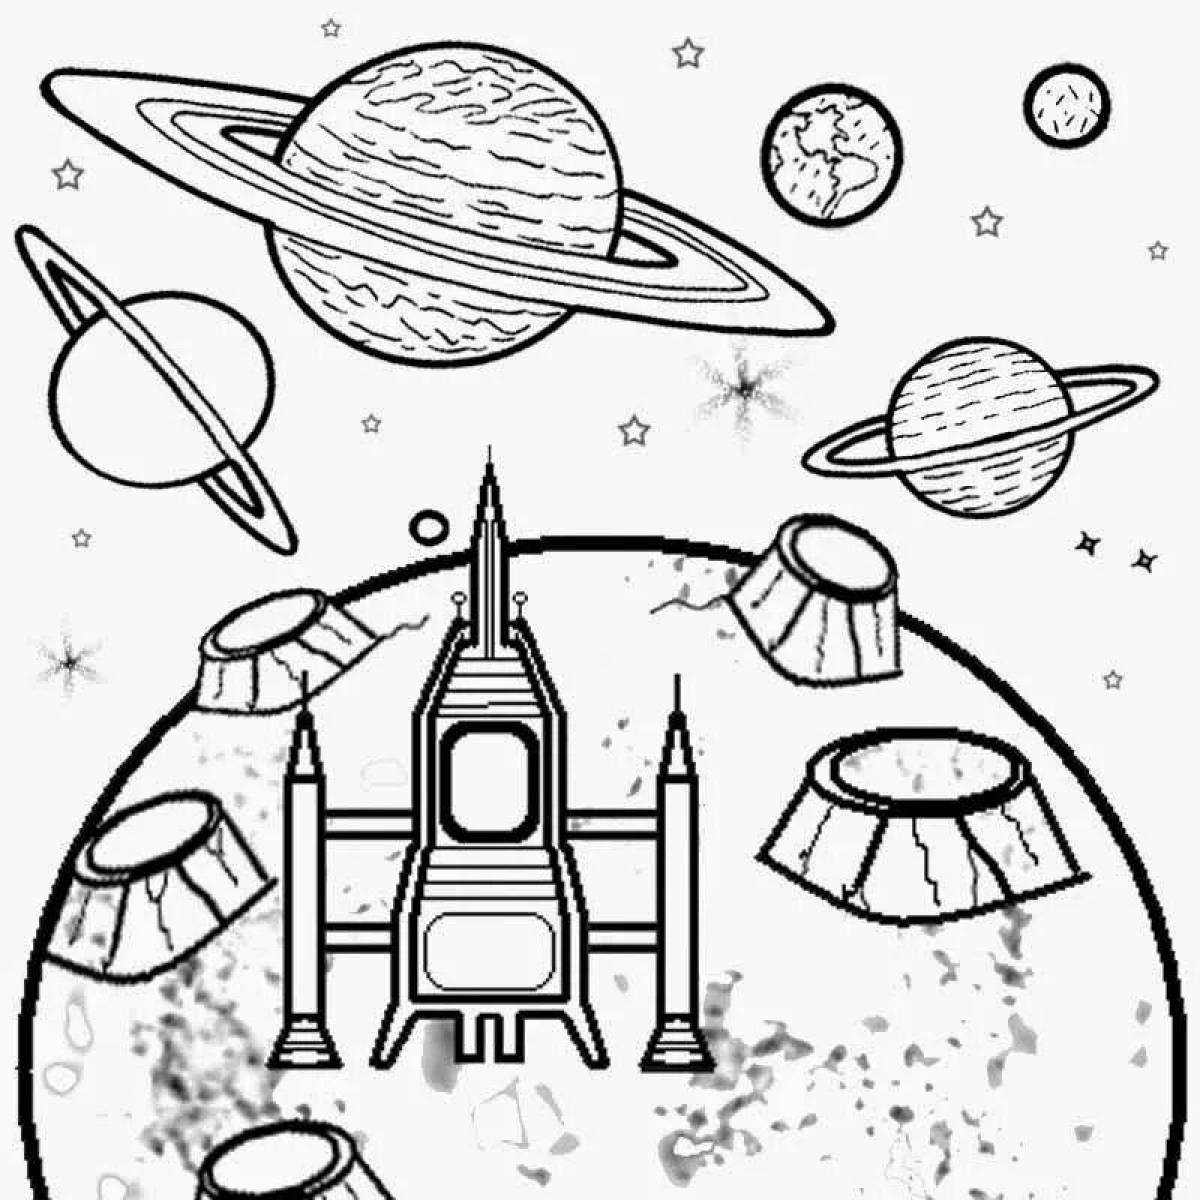 Great space and planets coloring pages for kids